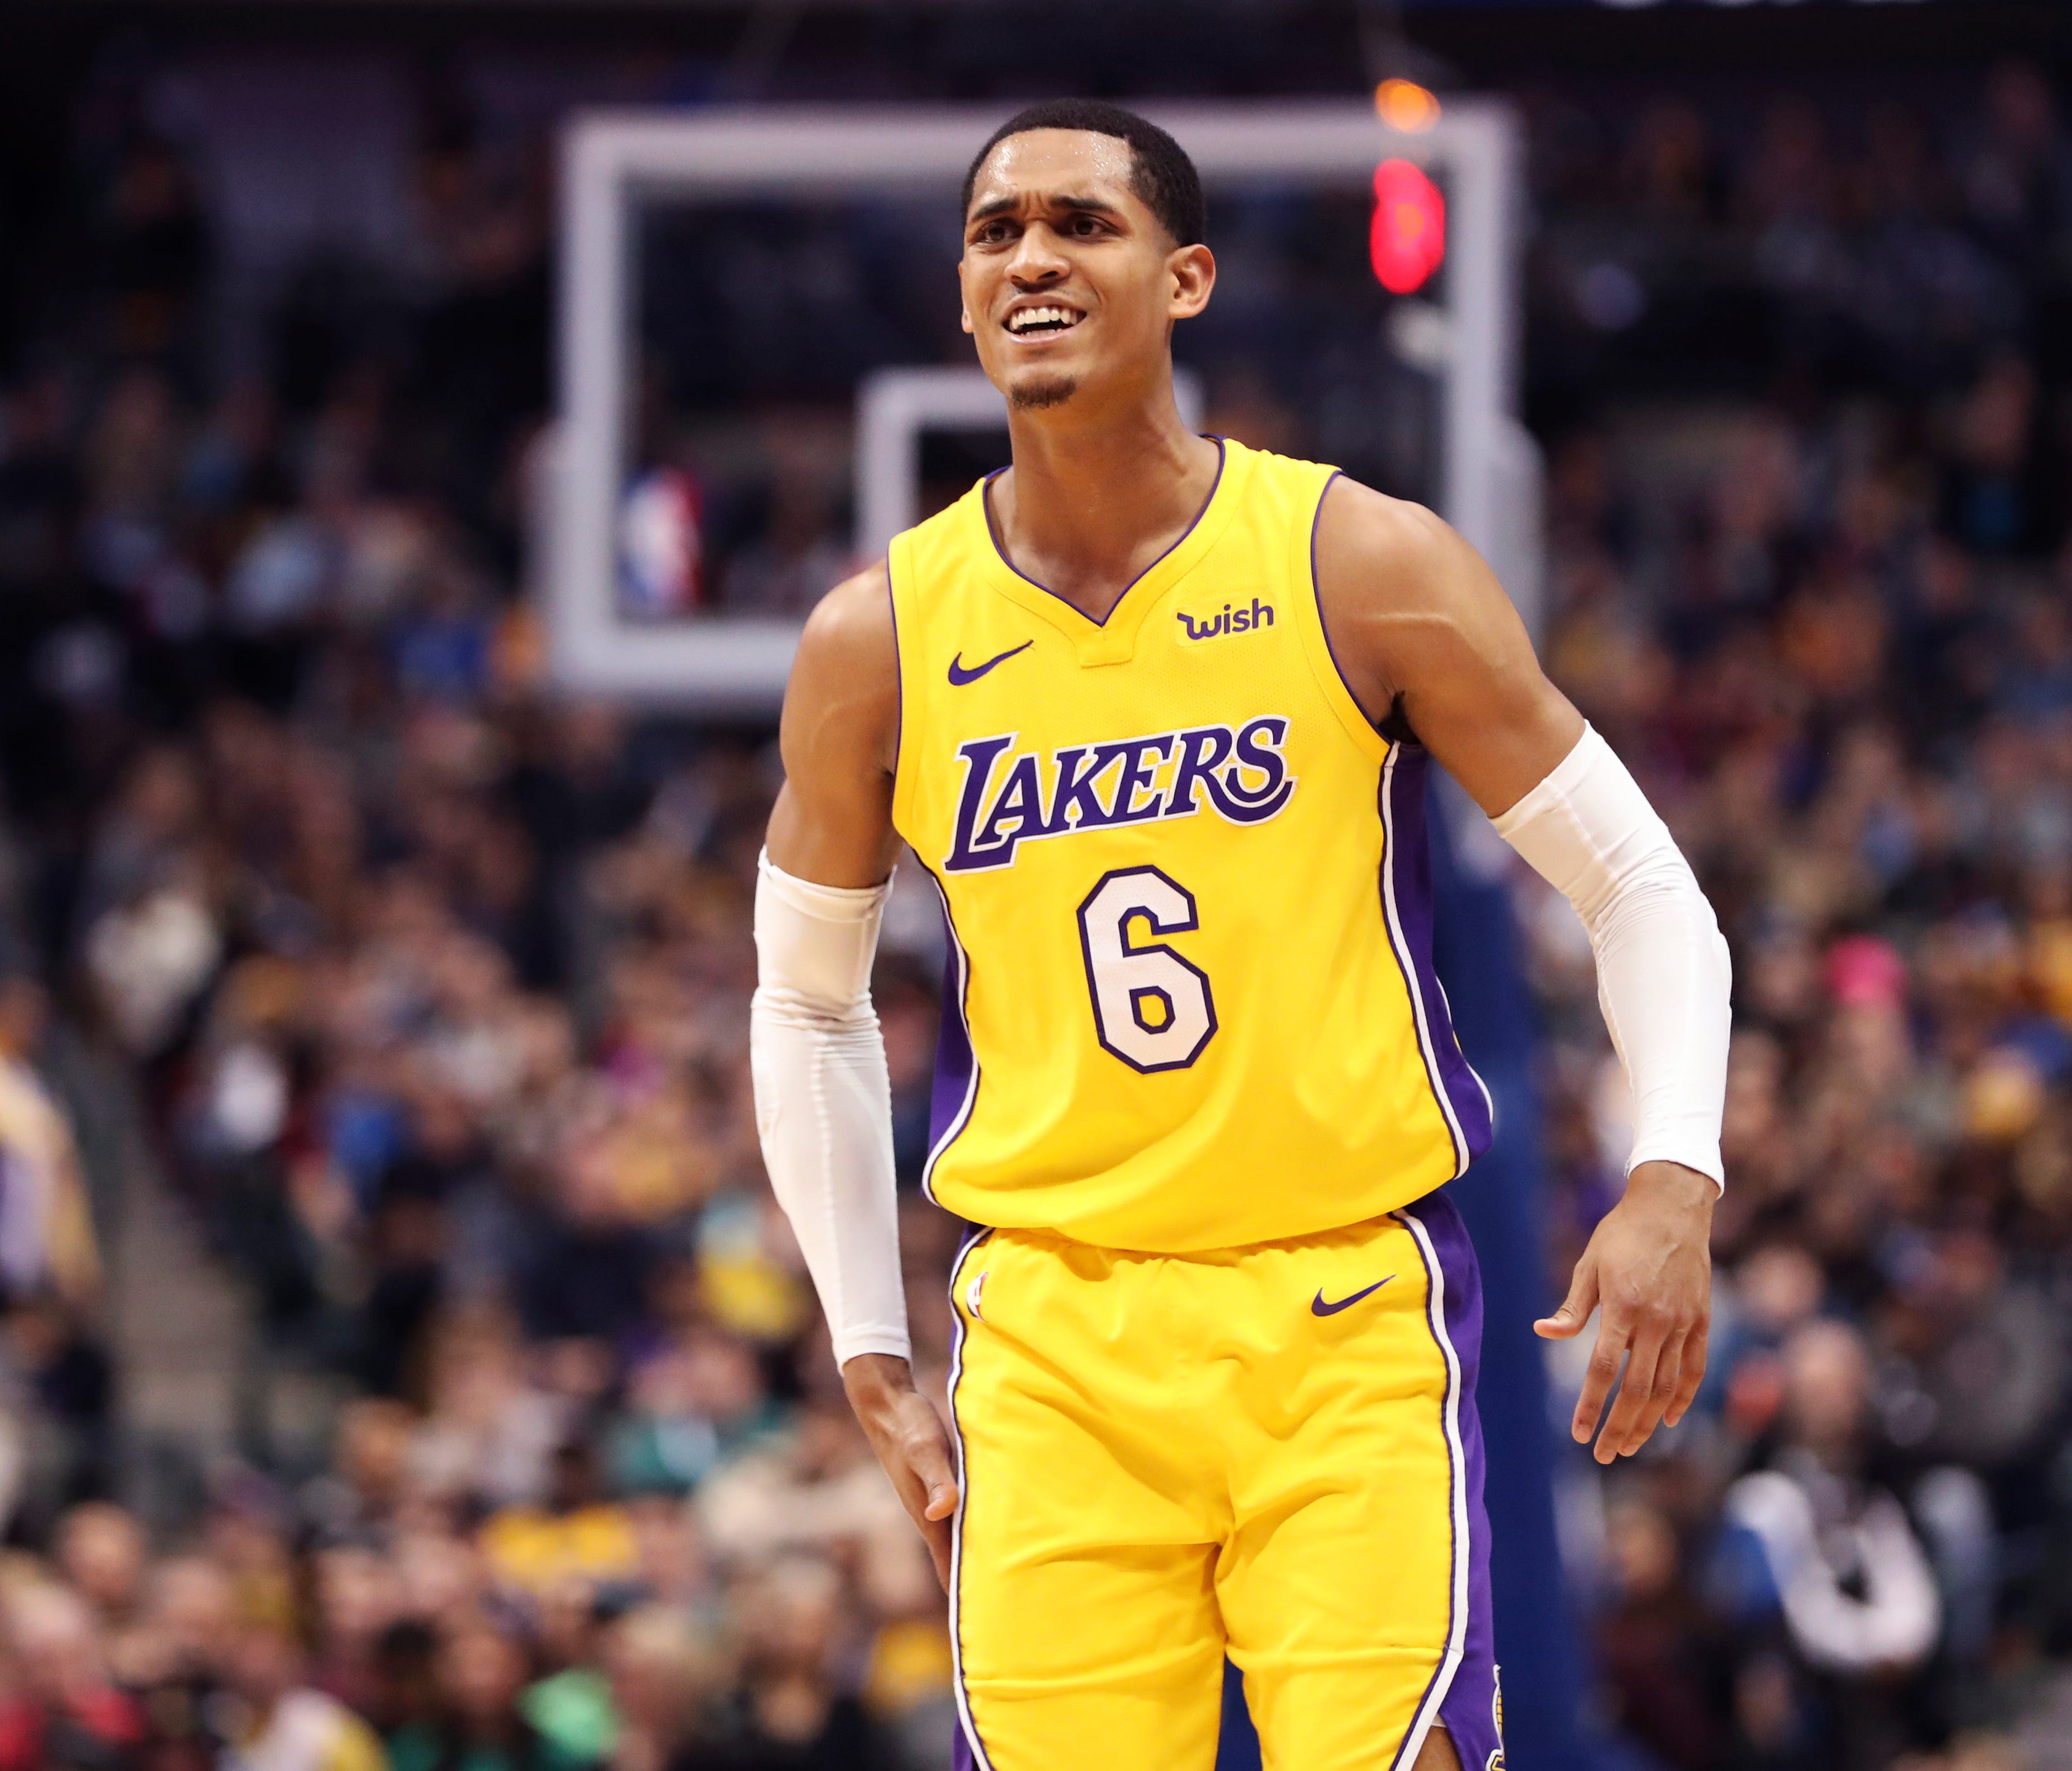 Los Angeles Lakers guard Jordan Clarkson reacts  during the second half against the Dallas Mavericks at American Airlines Center.